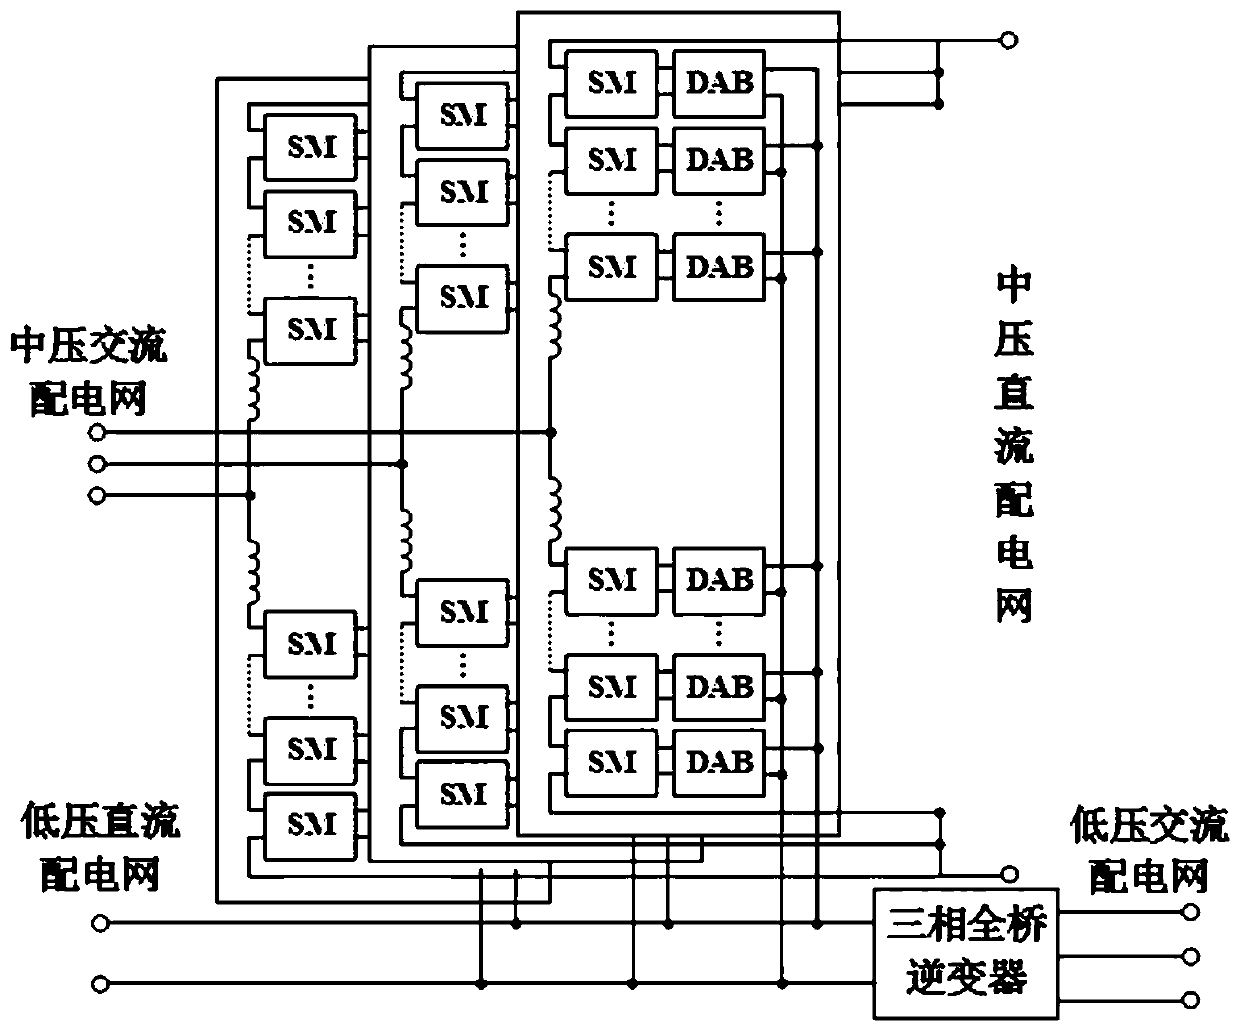 Solid-state transformer topology family applied to alternating-current and direct-current hybrid power distribution network and design method